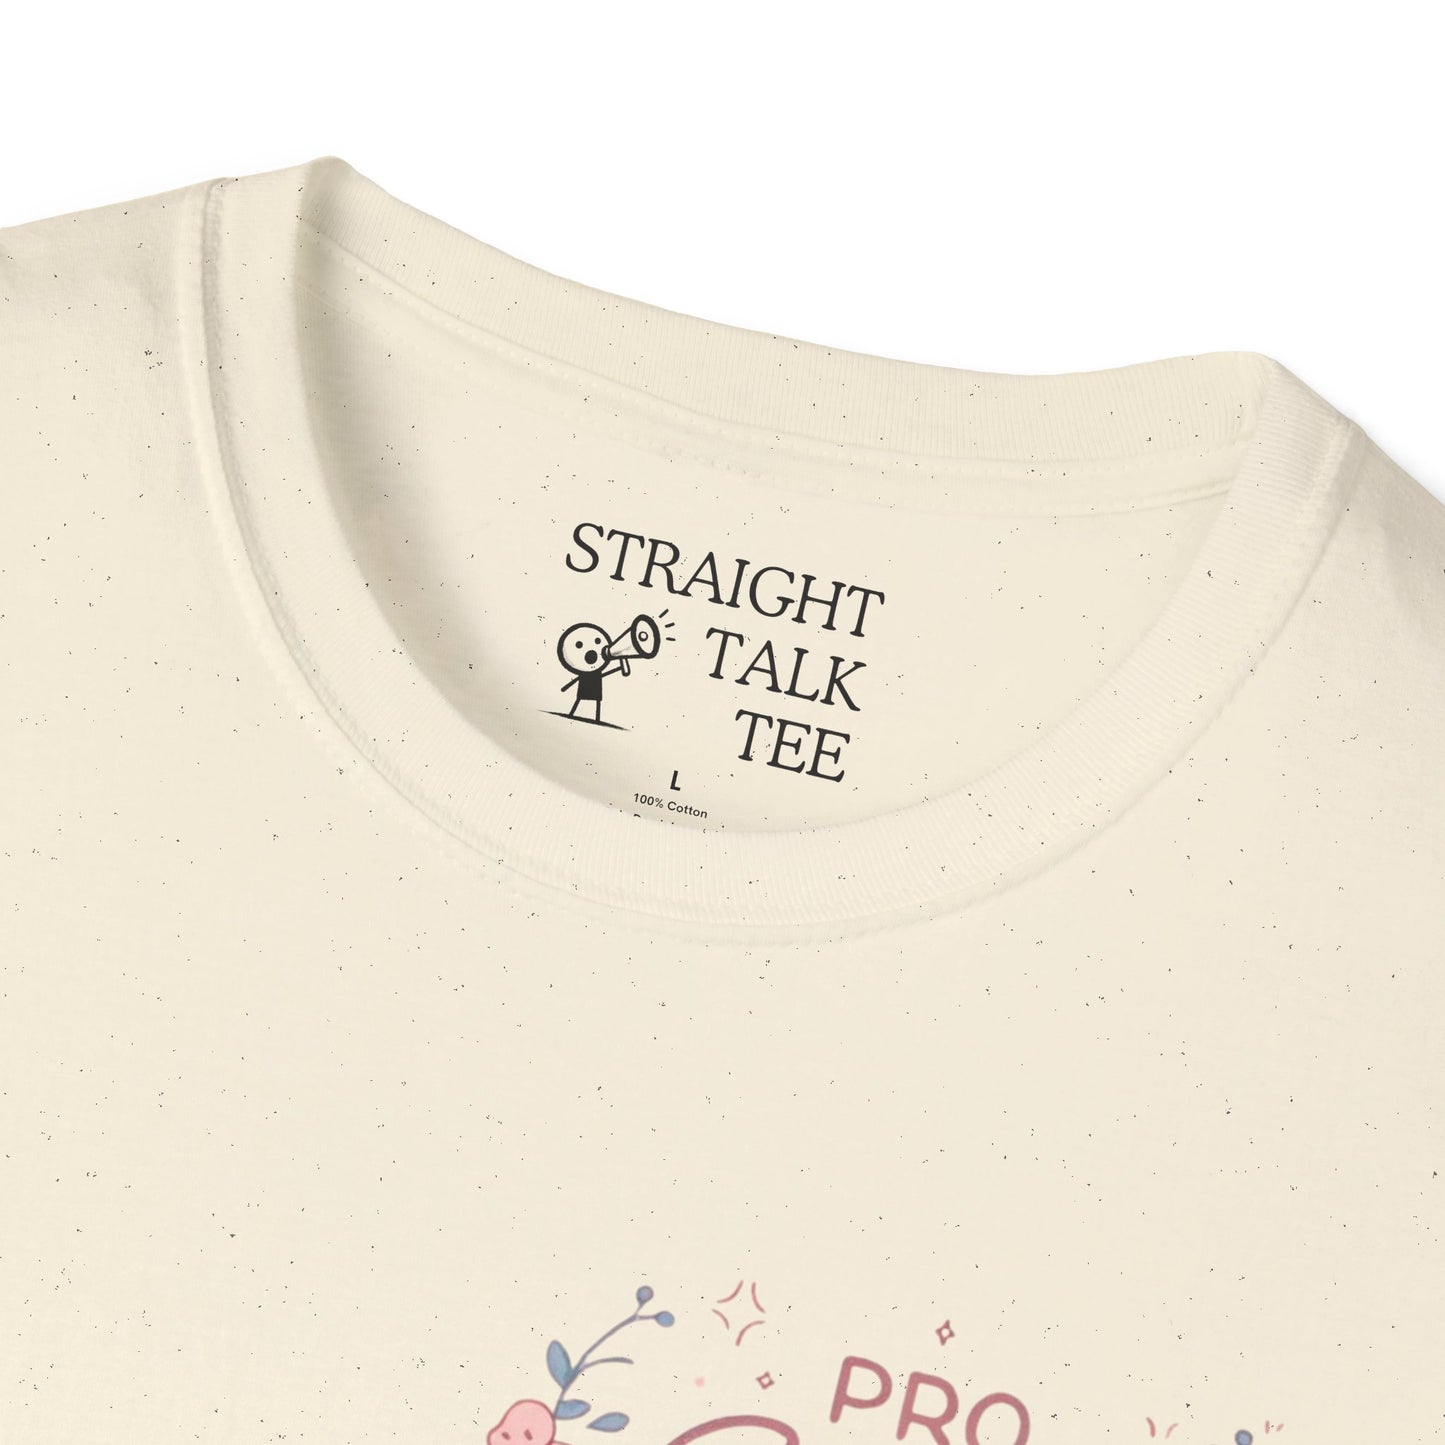 Pro-Choice Voter Soft-Style t-shirt |unisex| Clear and Bold Statement, Won't be Silent Anymore!